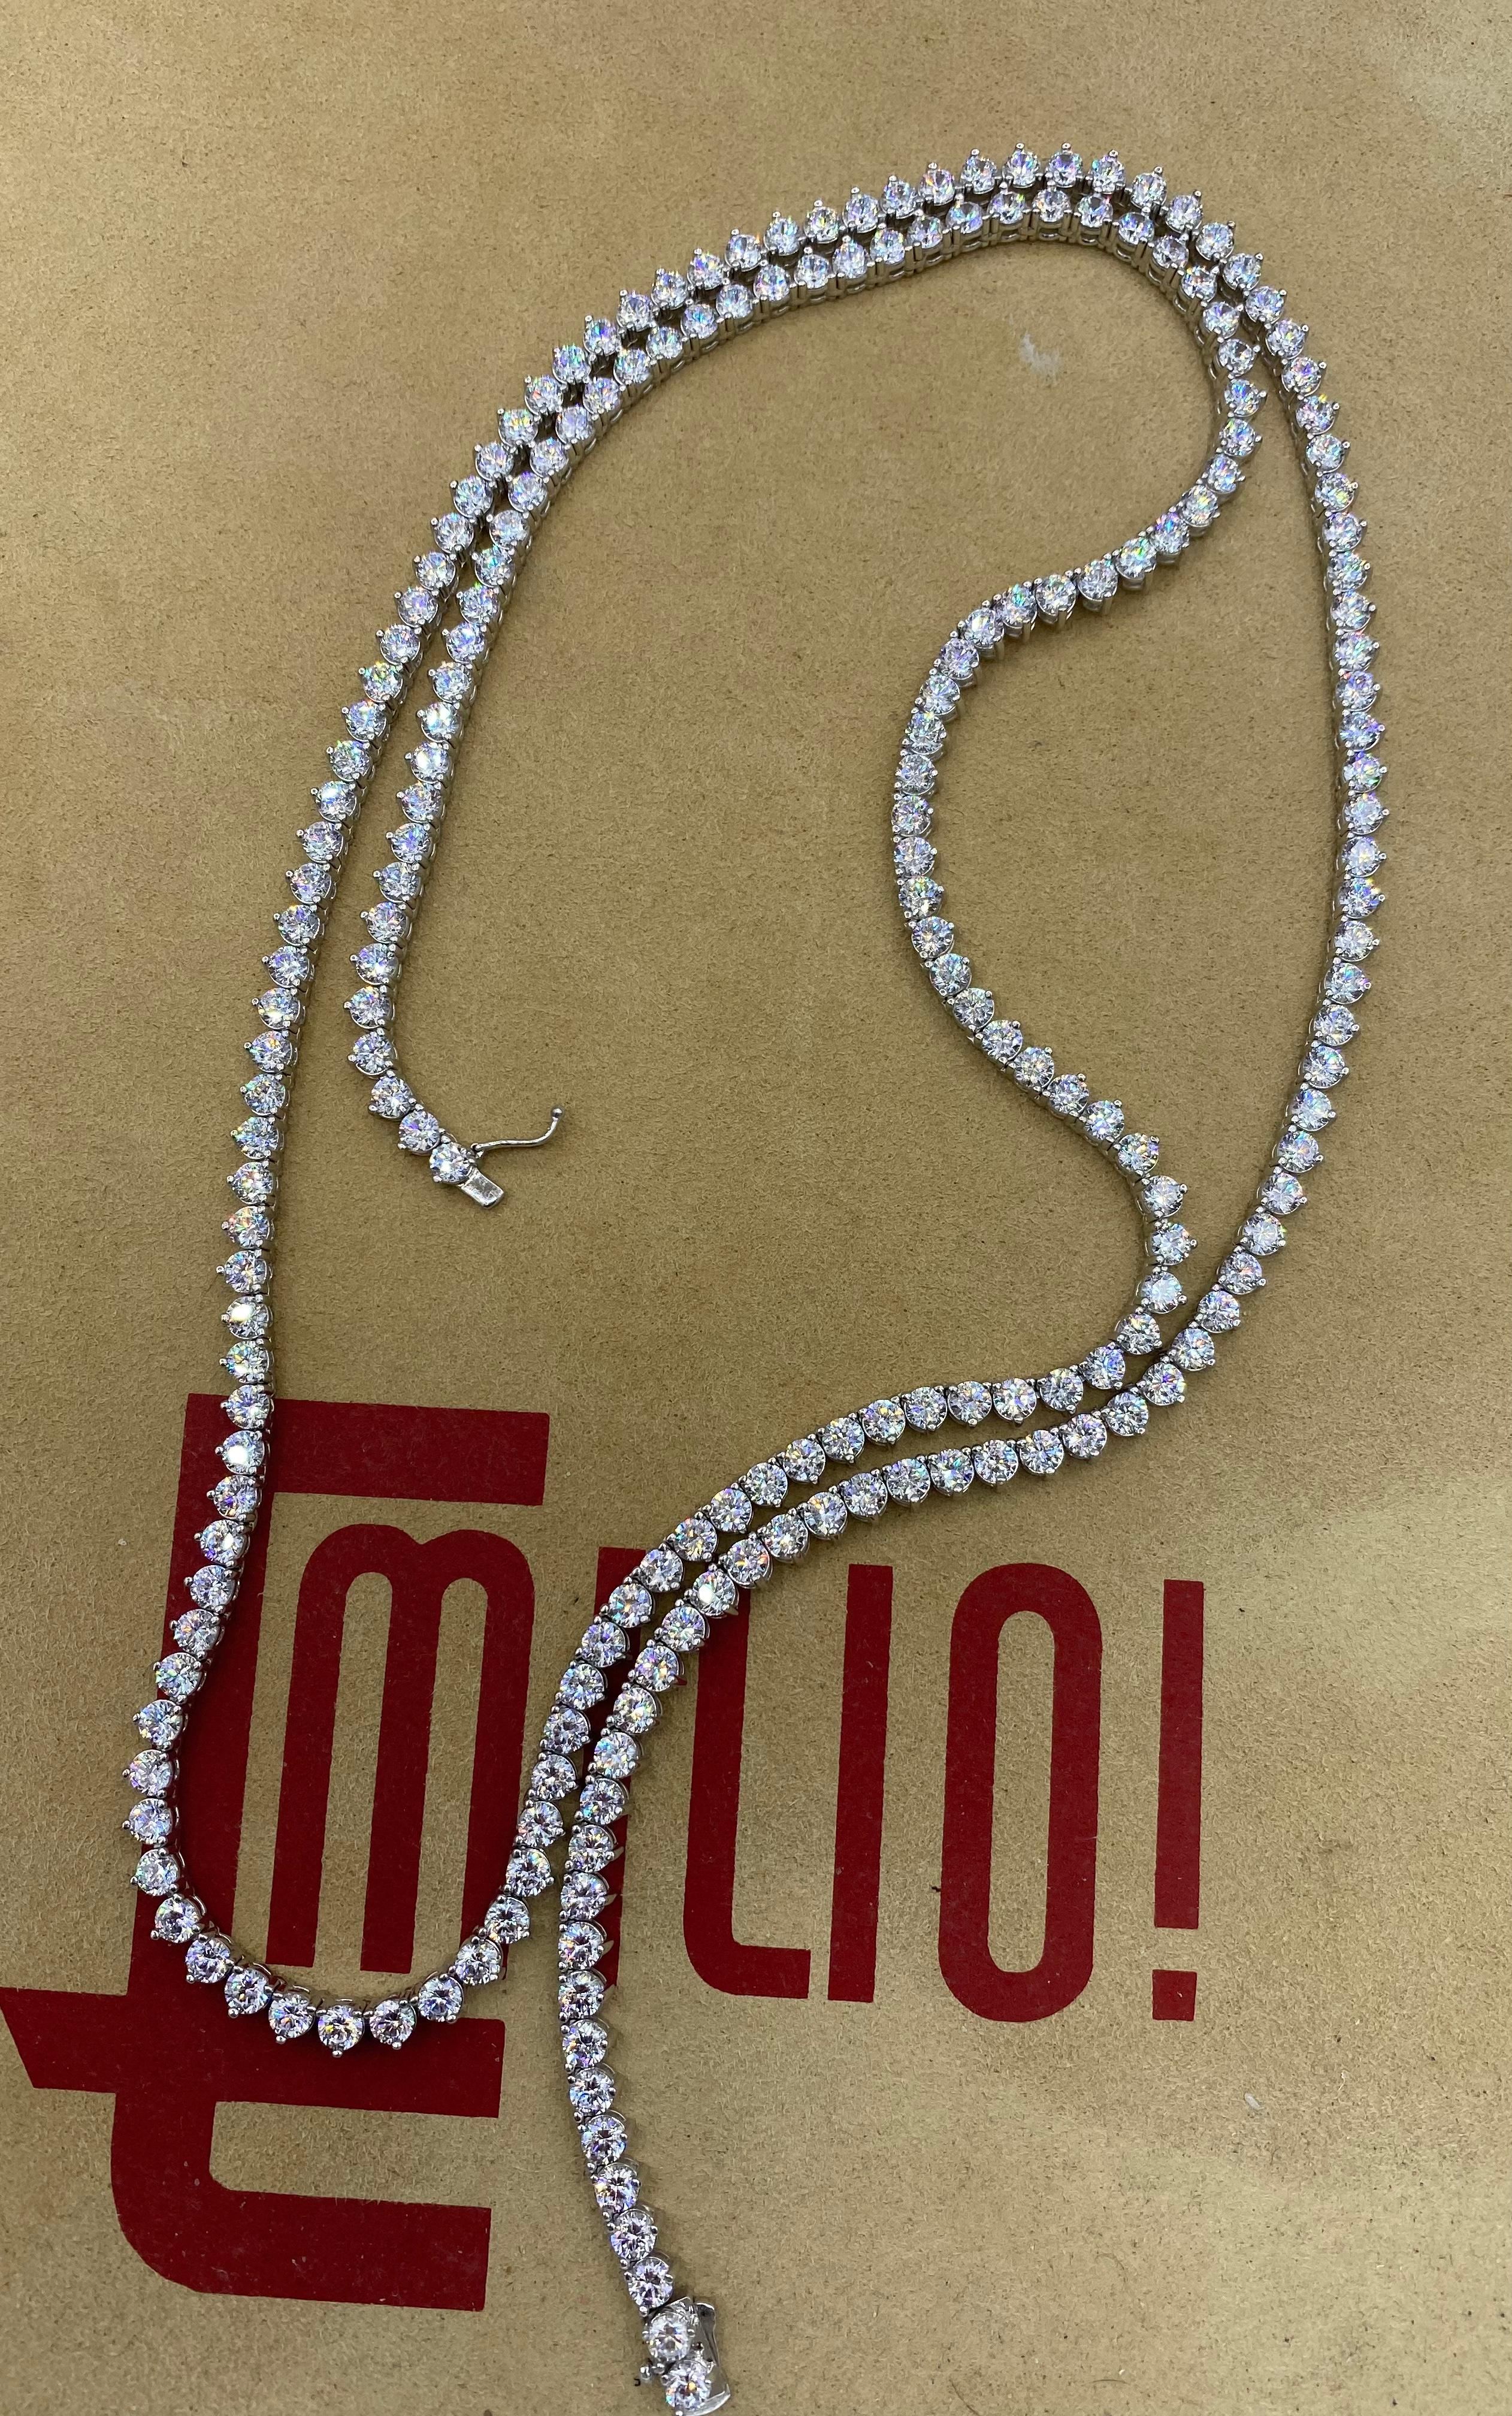 From the vault at Emilio Jewelry, located on New York's iconic Fifth Avenue,
Hand made in the Emilio Atelier a stunning necklace set in 3 prongs Natural White Round Diamonds Set In a 3 Prong Emilio! Setting. This stunning classic opera necklace can